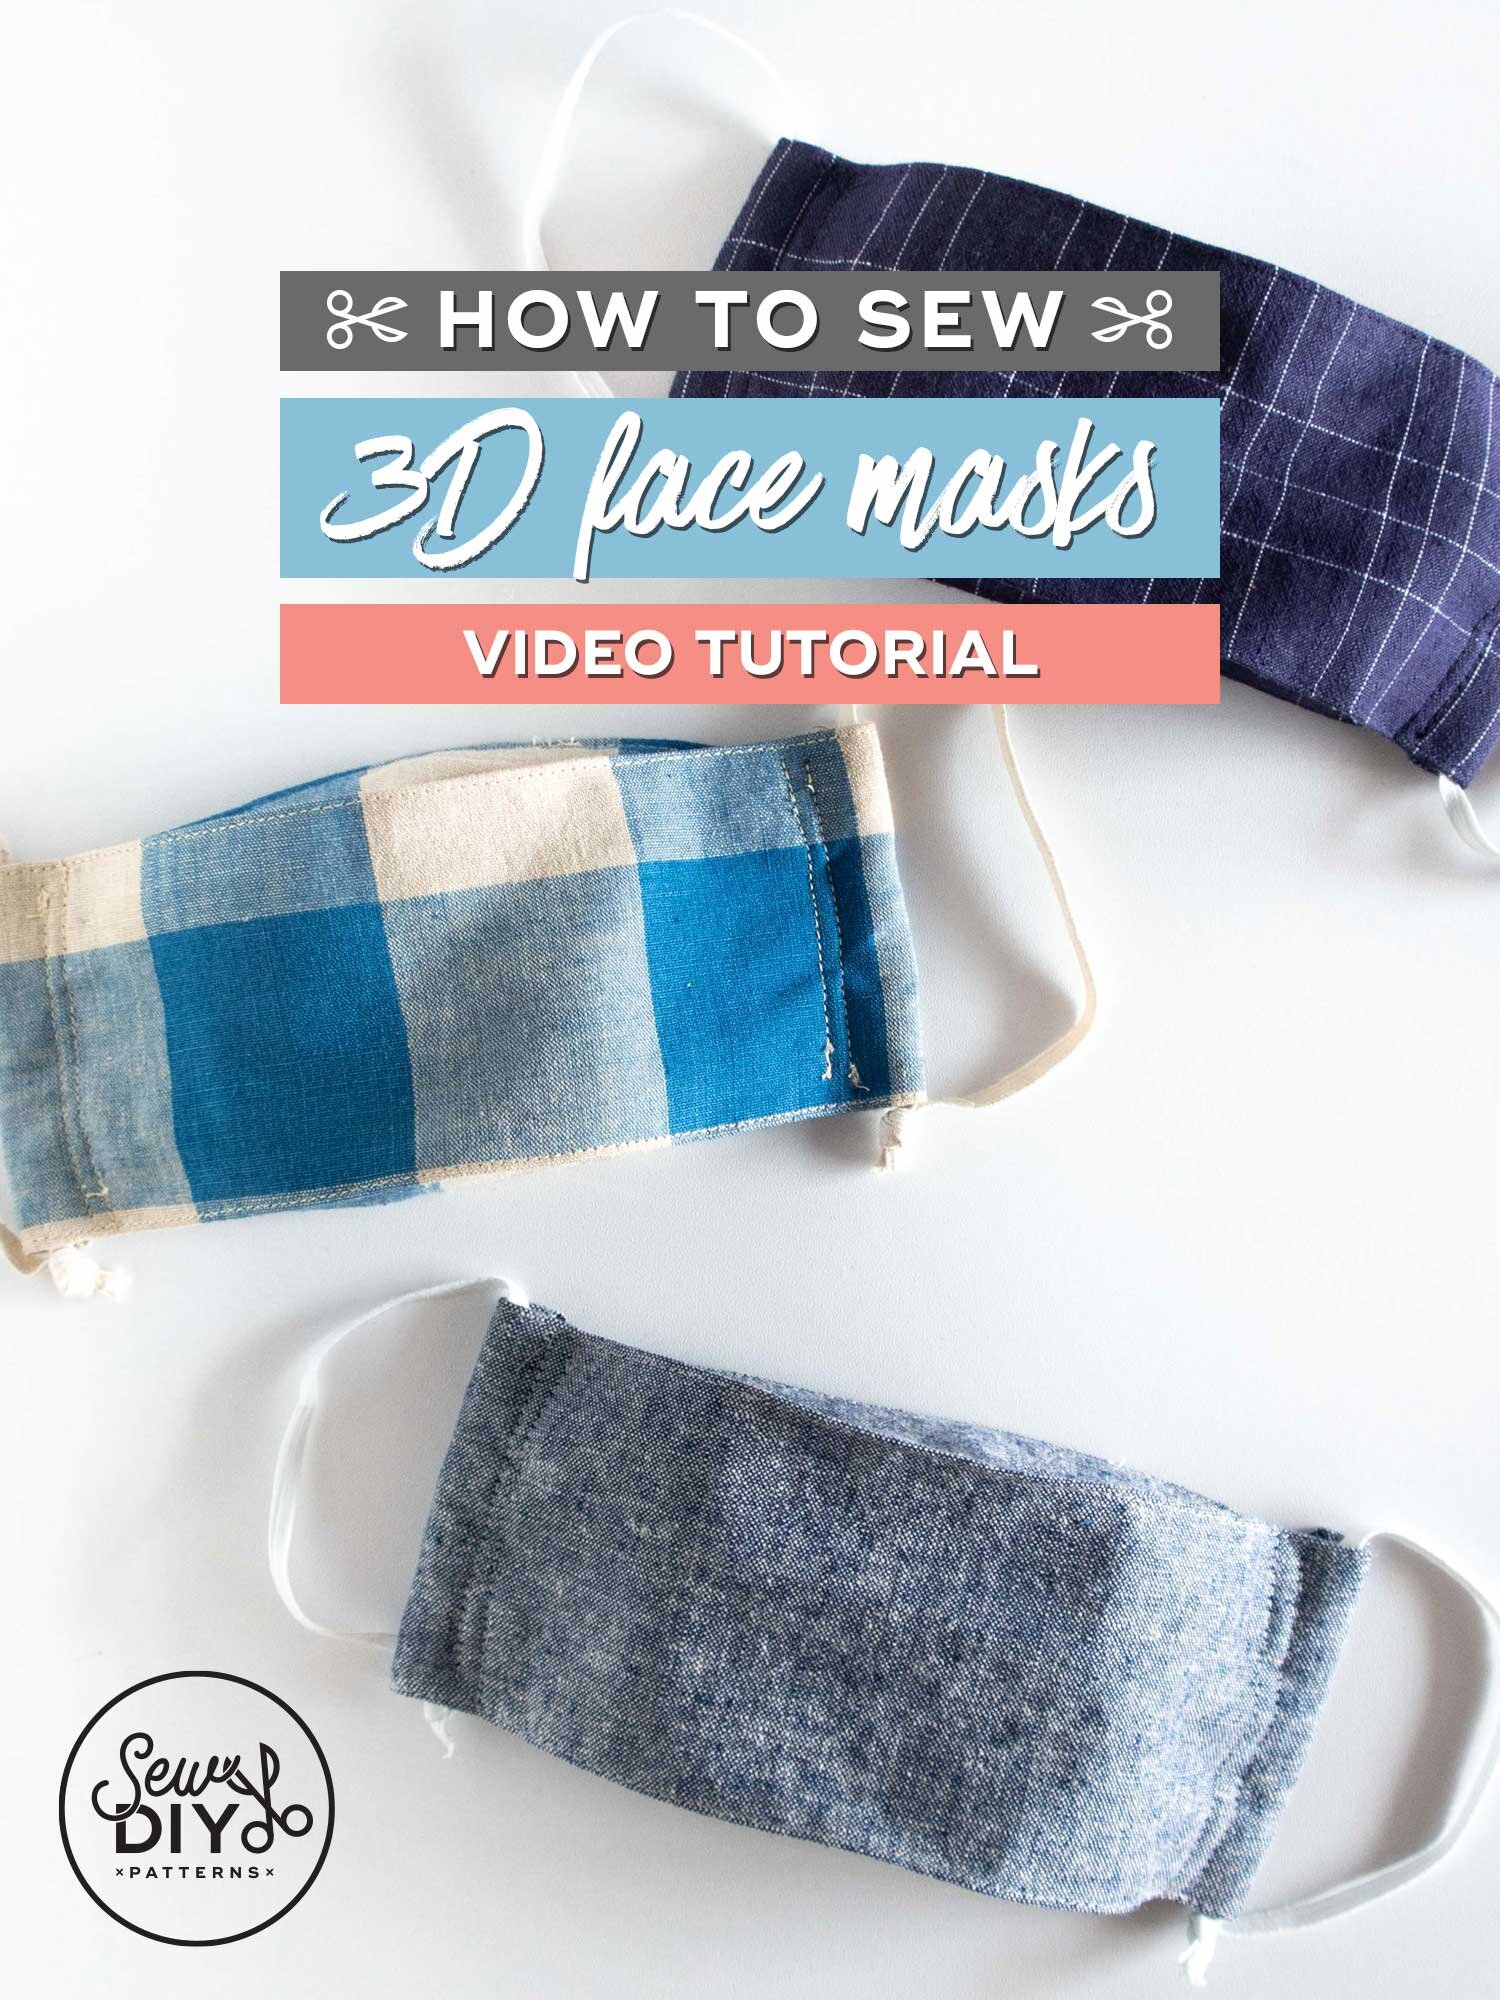 How To Sew A 3d Face Mask Quickly And Easily Video Tutorial And Free Template Sew Diy